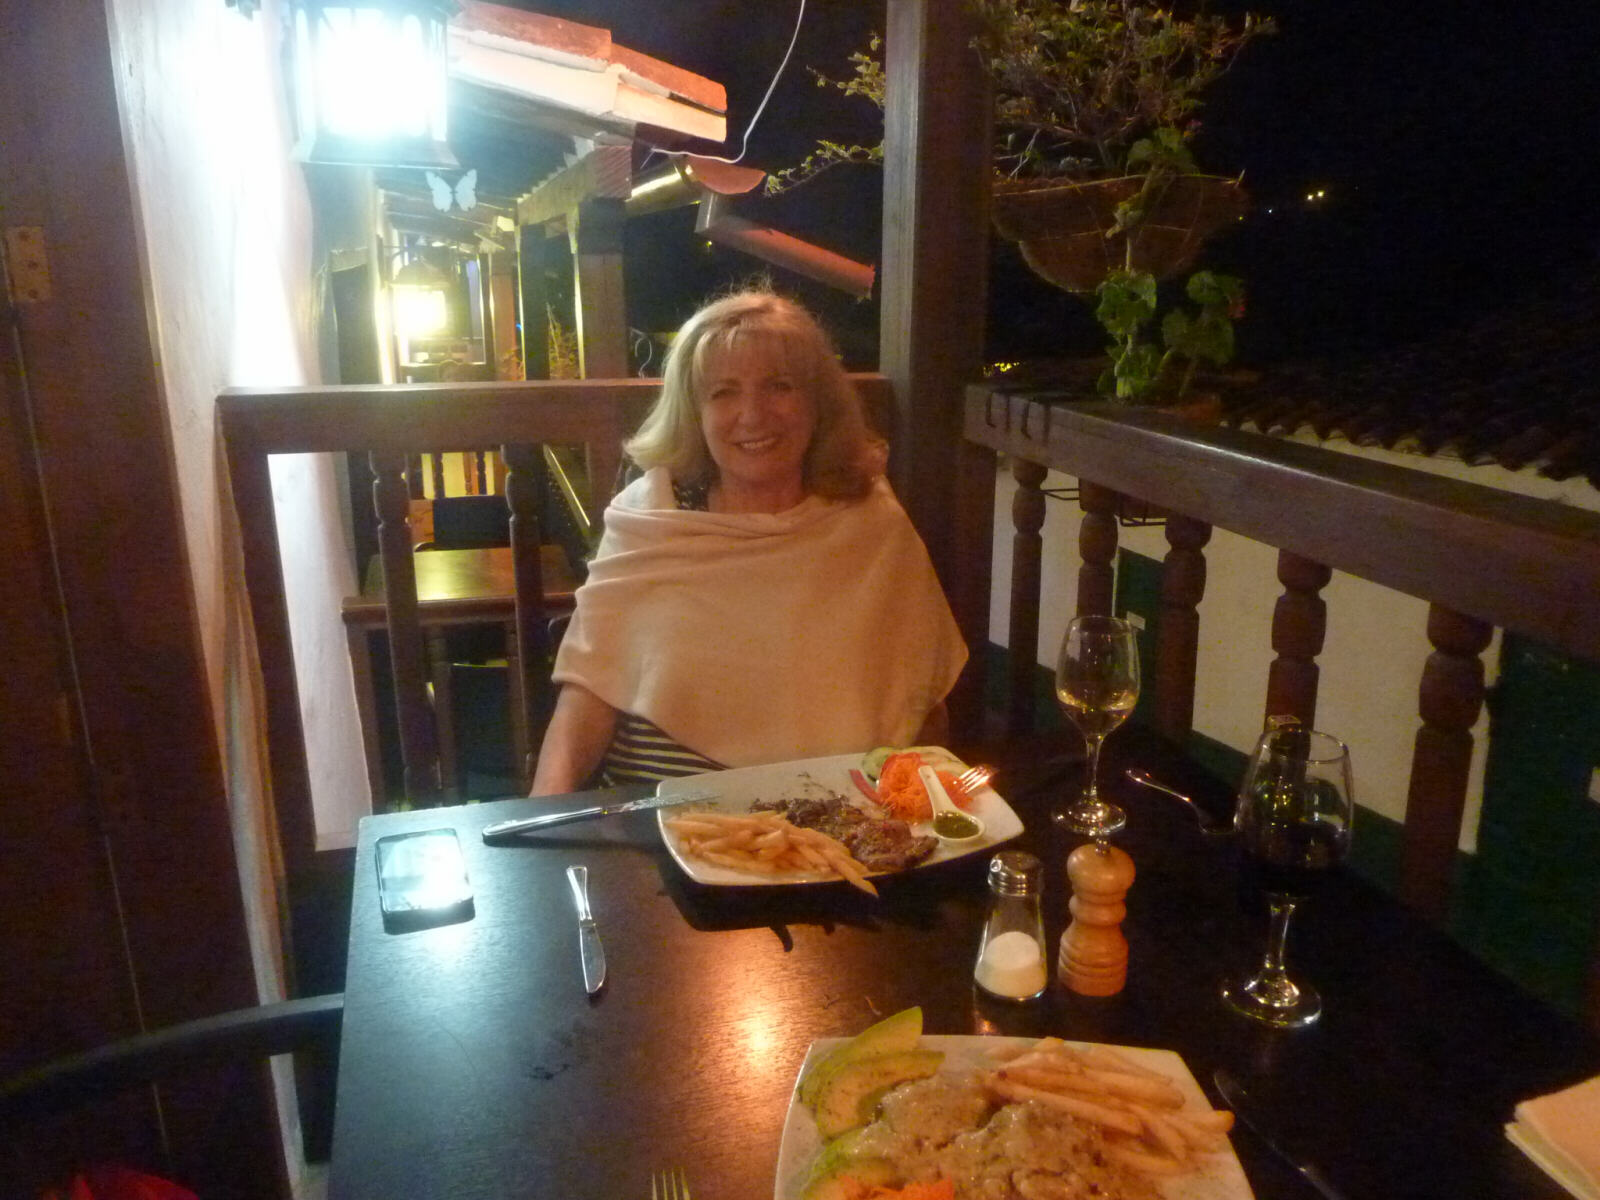 Dinner at the Don Juan restaurant in Barichara, Colombia